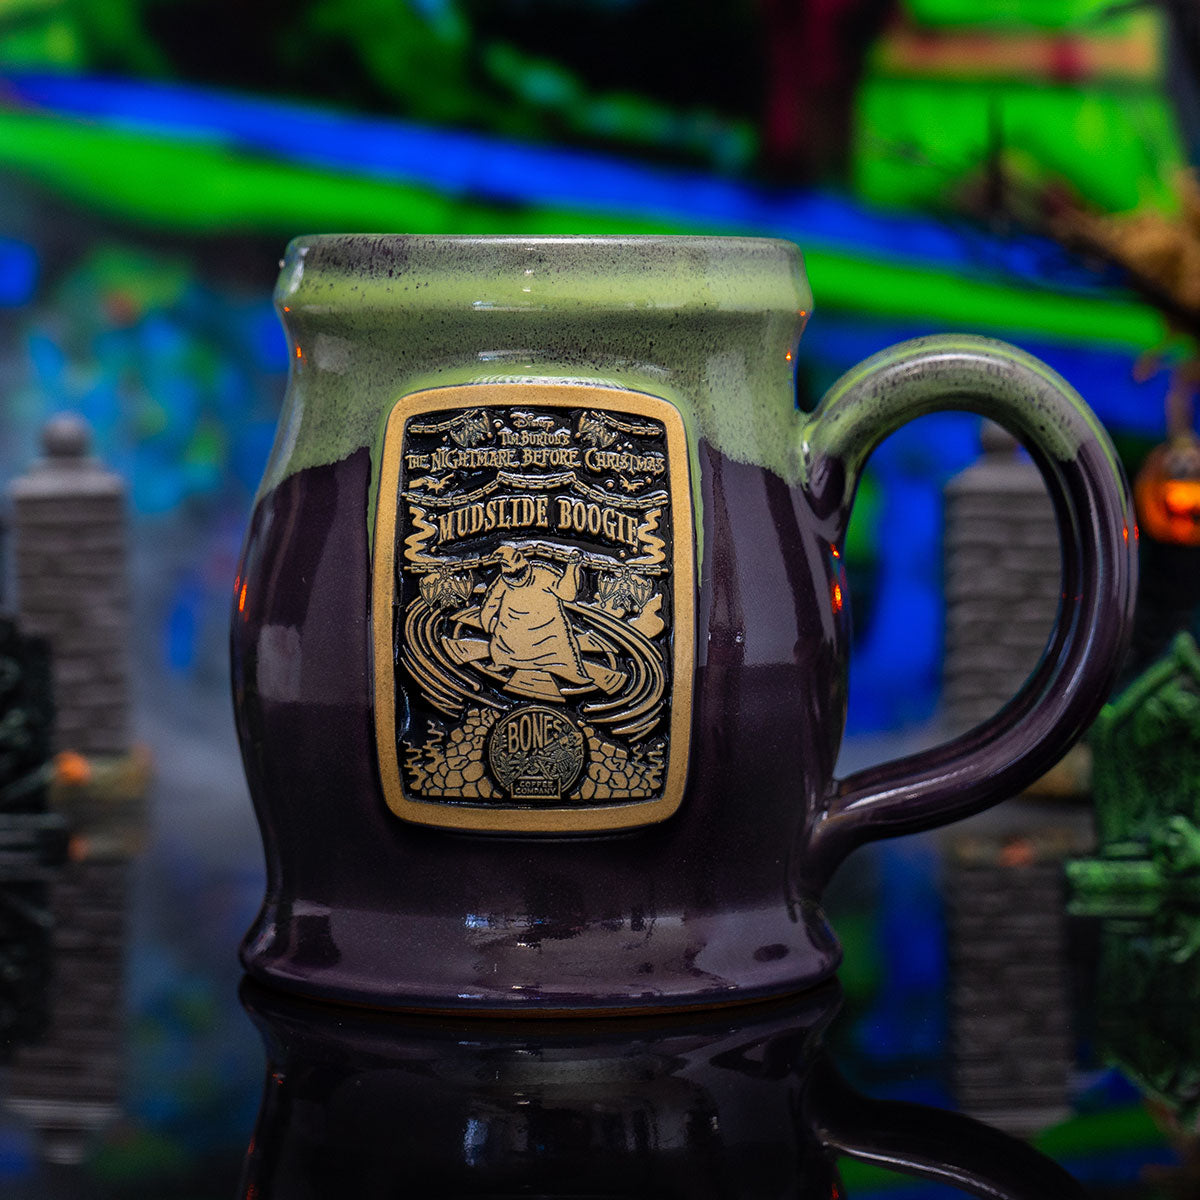 The front of the Bones Coffee Company Mudslide Boogie hand thrown mug with Oogie Boogie on the golden medallion. It is inspired by Disney Tim Burton’s The Nightmare Before Christmas. The mug is plum colored with a kiwi green glaze on top. It is inside a toy graveyard.